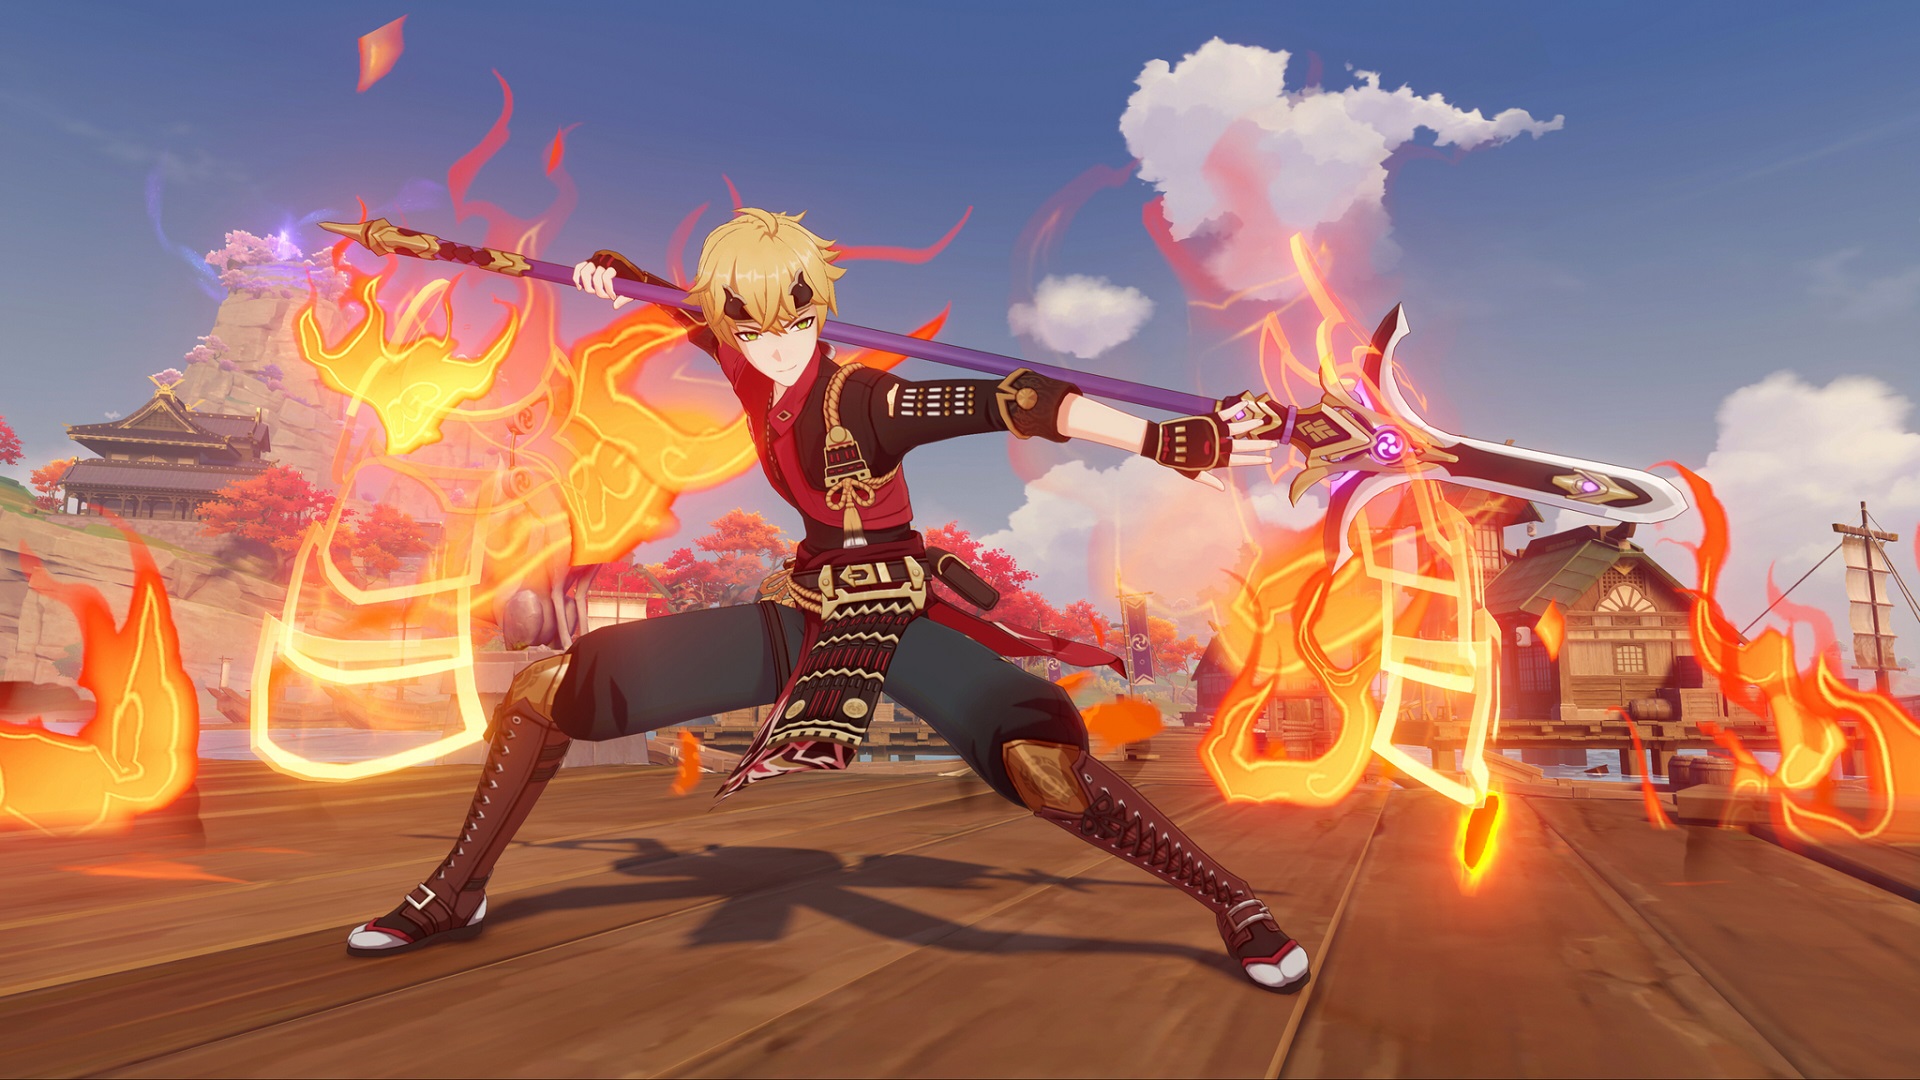 Genshin Impact's Thoma performing a fiery attack